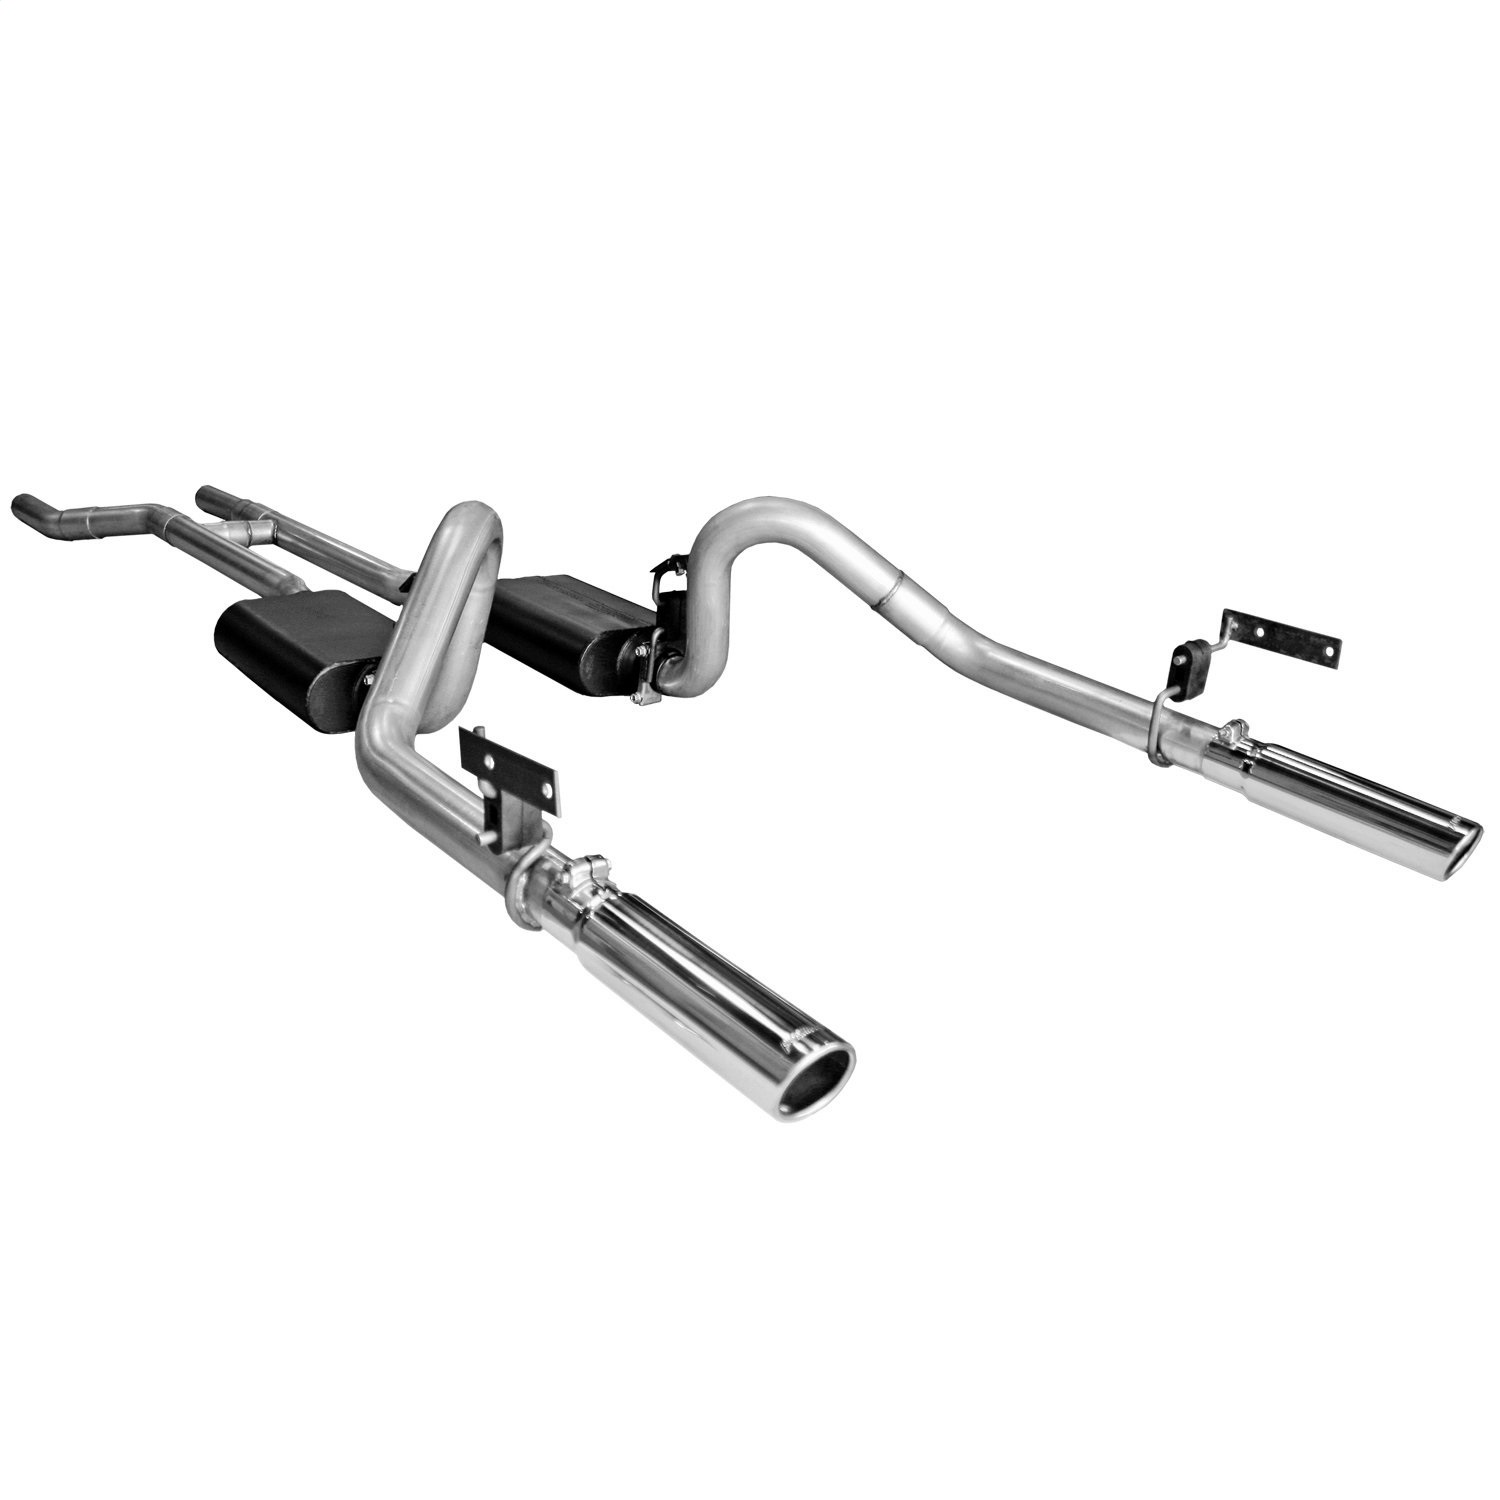 Flowmaster Flowmaster 17281 American Thunder Downpipe Back Exhaust System Fits Mustang